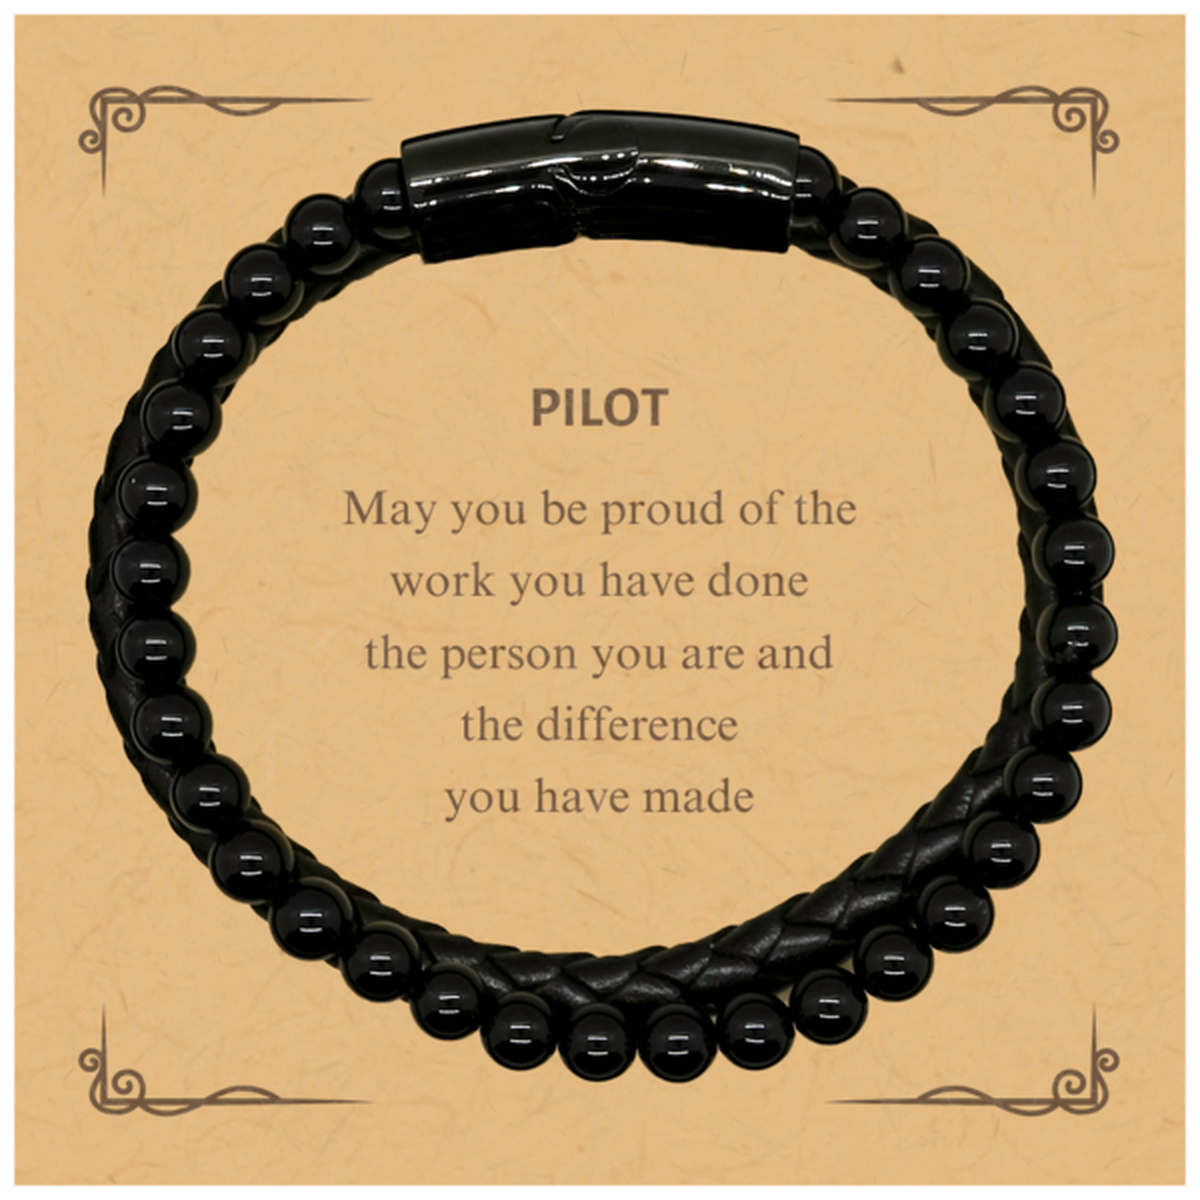 Pilot May you be proud of the work you have done, Retirement Pilot Stone Leather Bracelets for Colleague Appreciation Gifts Amazing for Pilot